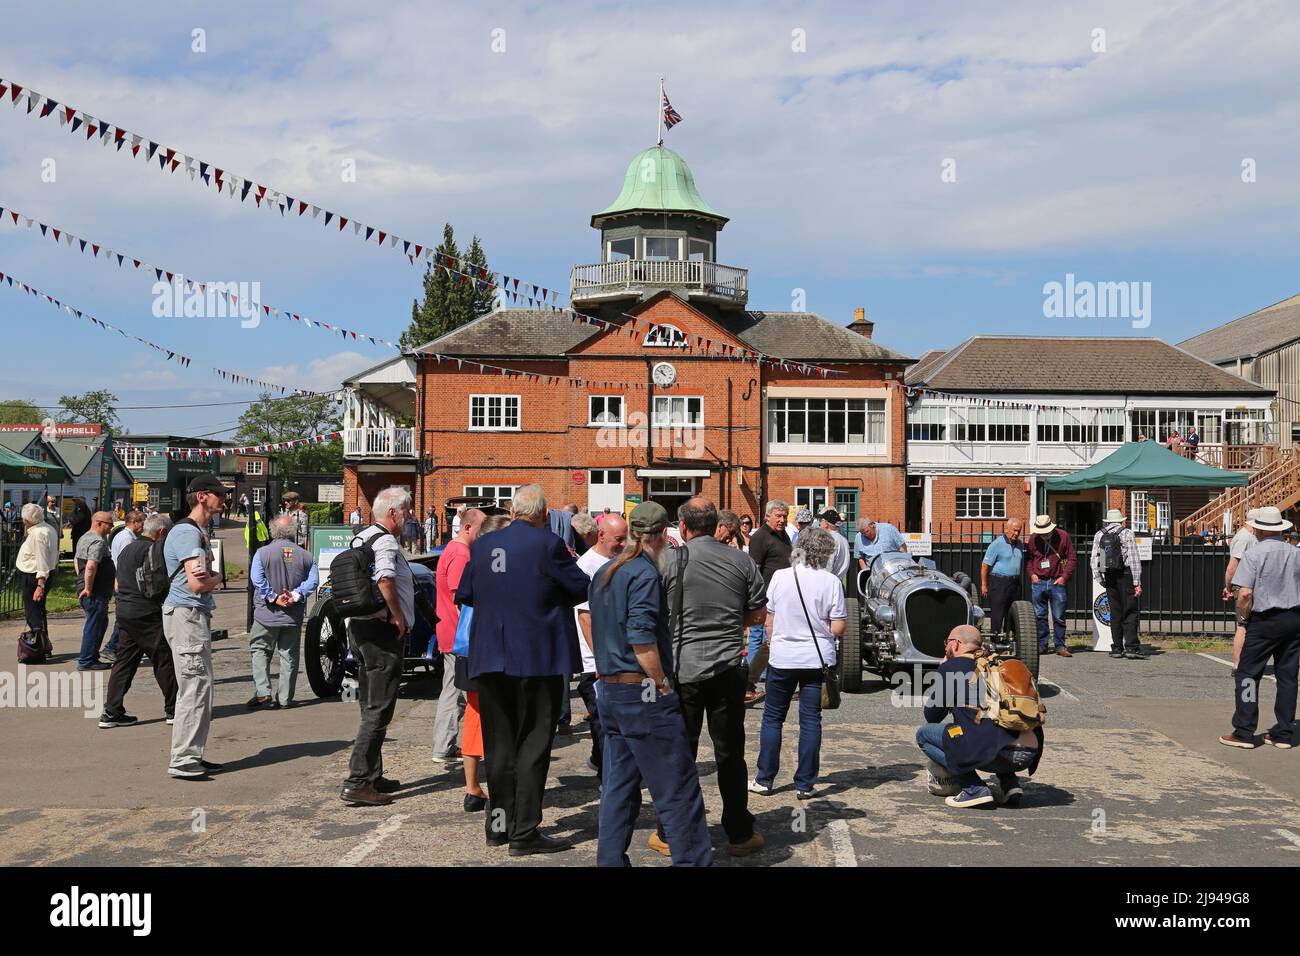 Historic record holders in Outer Paddock, Centenary of Speed, 17 May 2022, Brooklands Museum, Weybridge, Surrey, England, Great Britain, UK, Europe Stock Photo